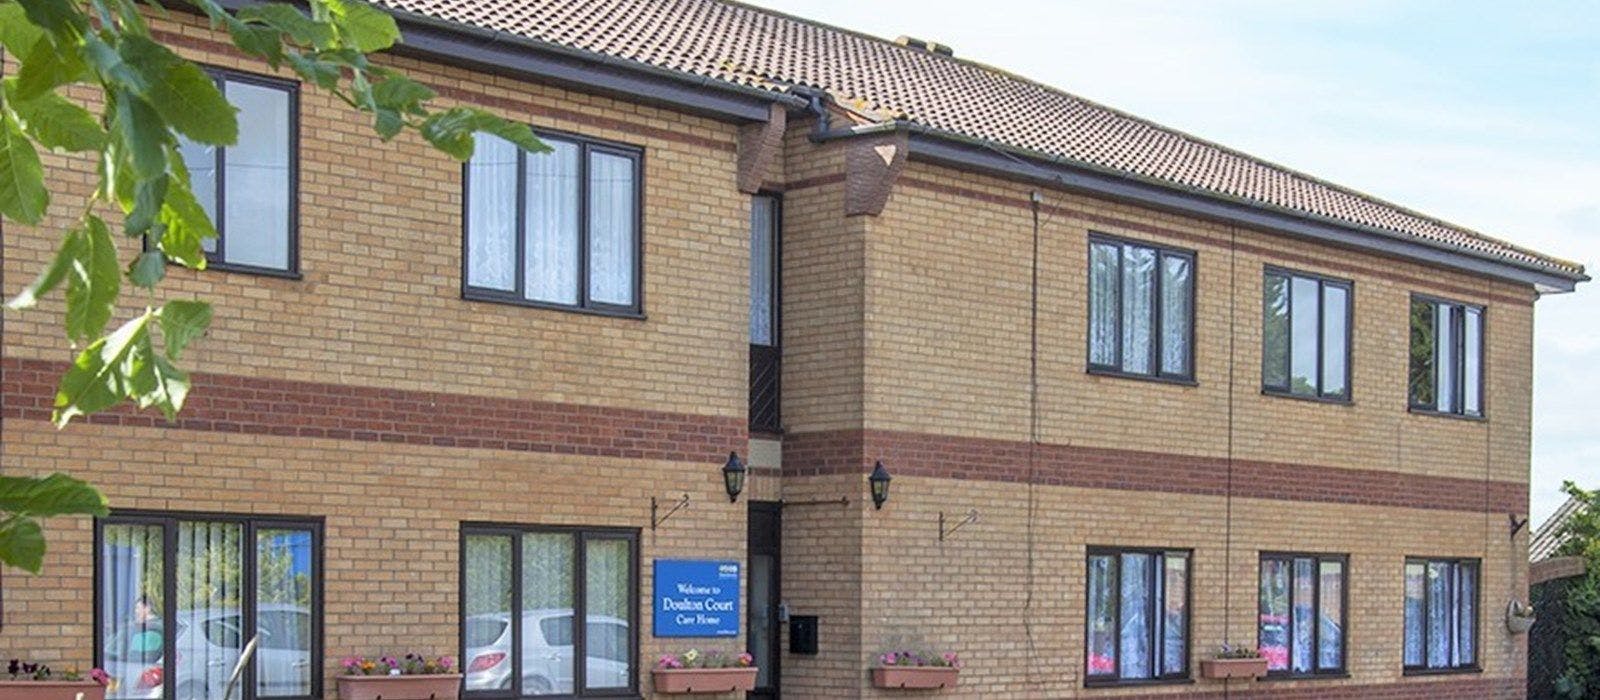 Doulton Court care home